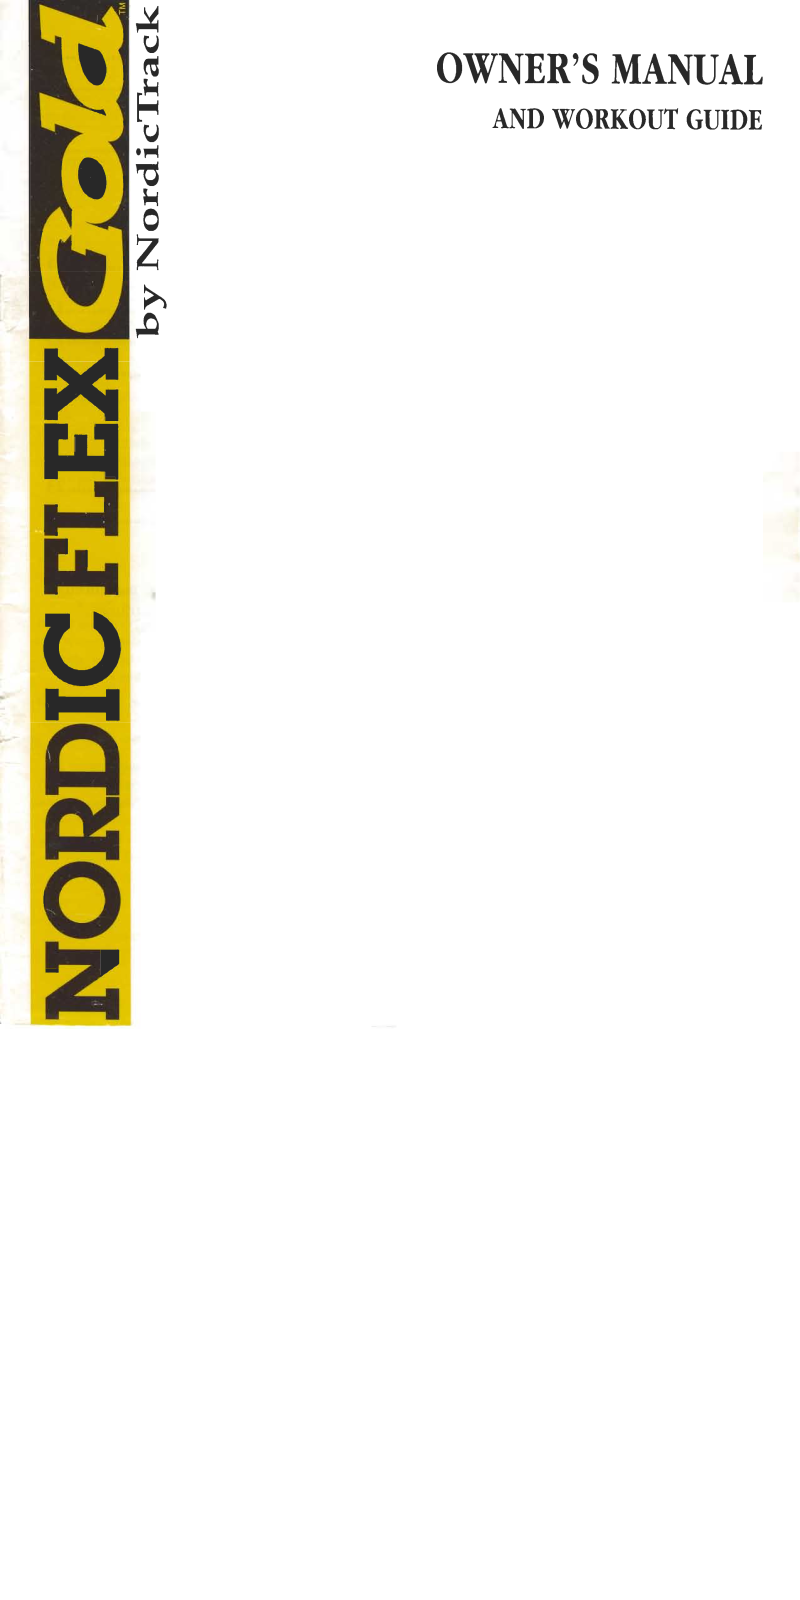 NordicTrack NT64880 Owner's Manual